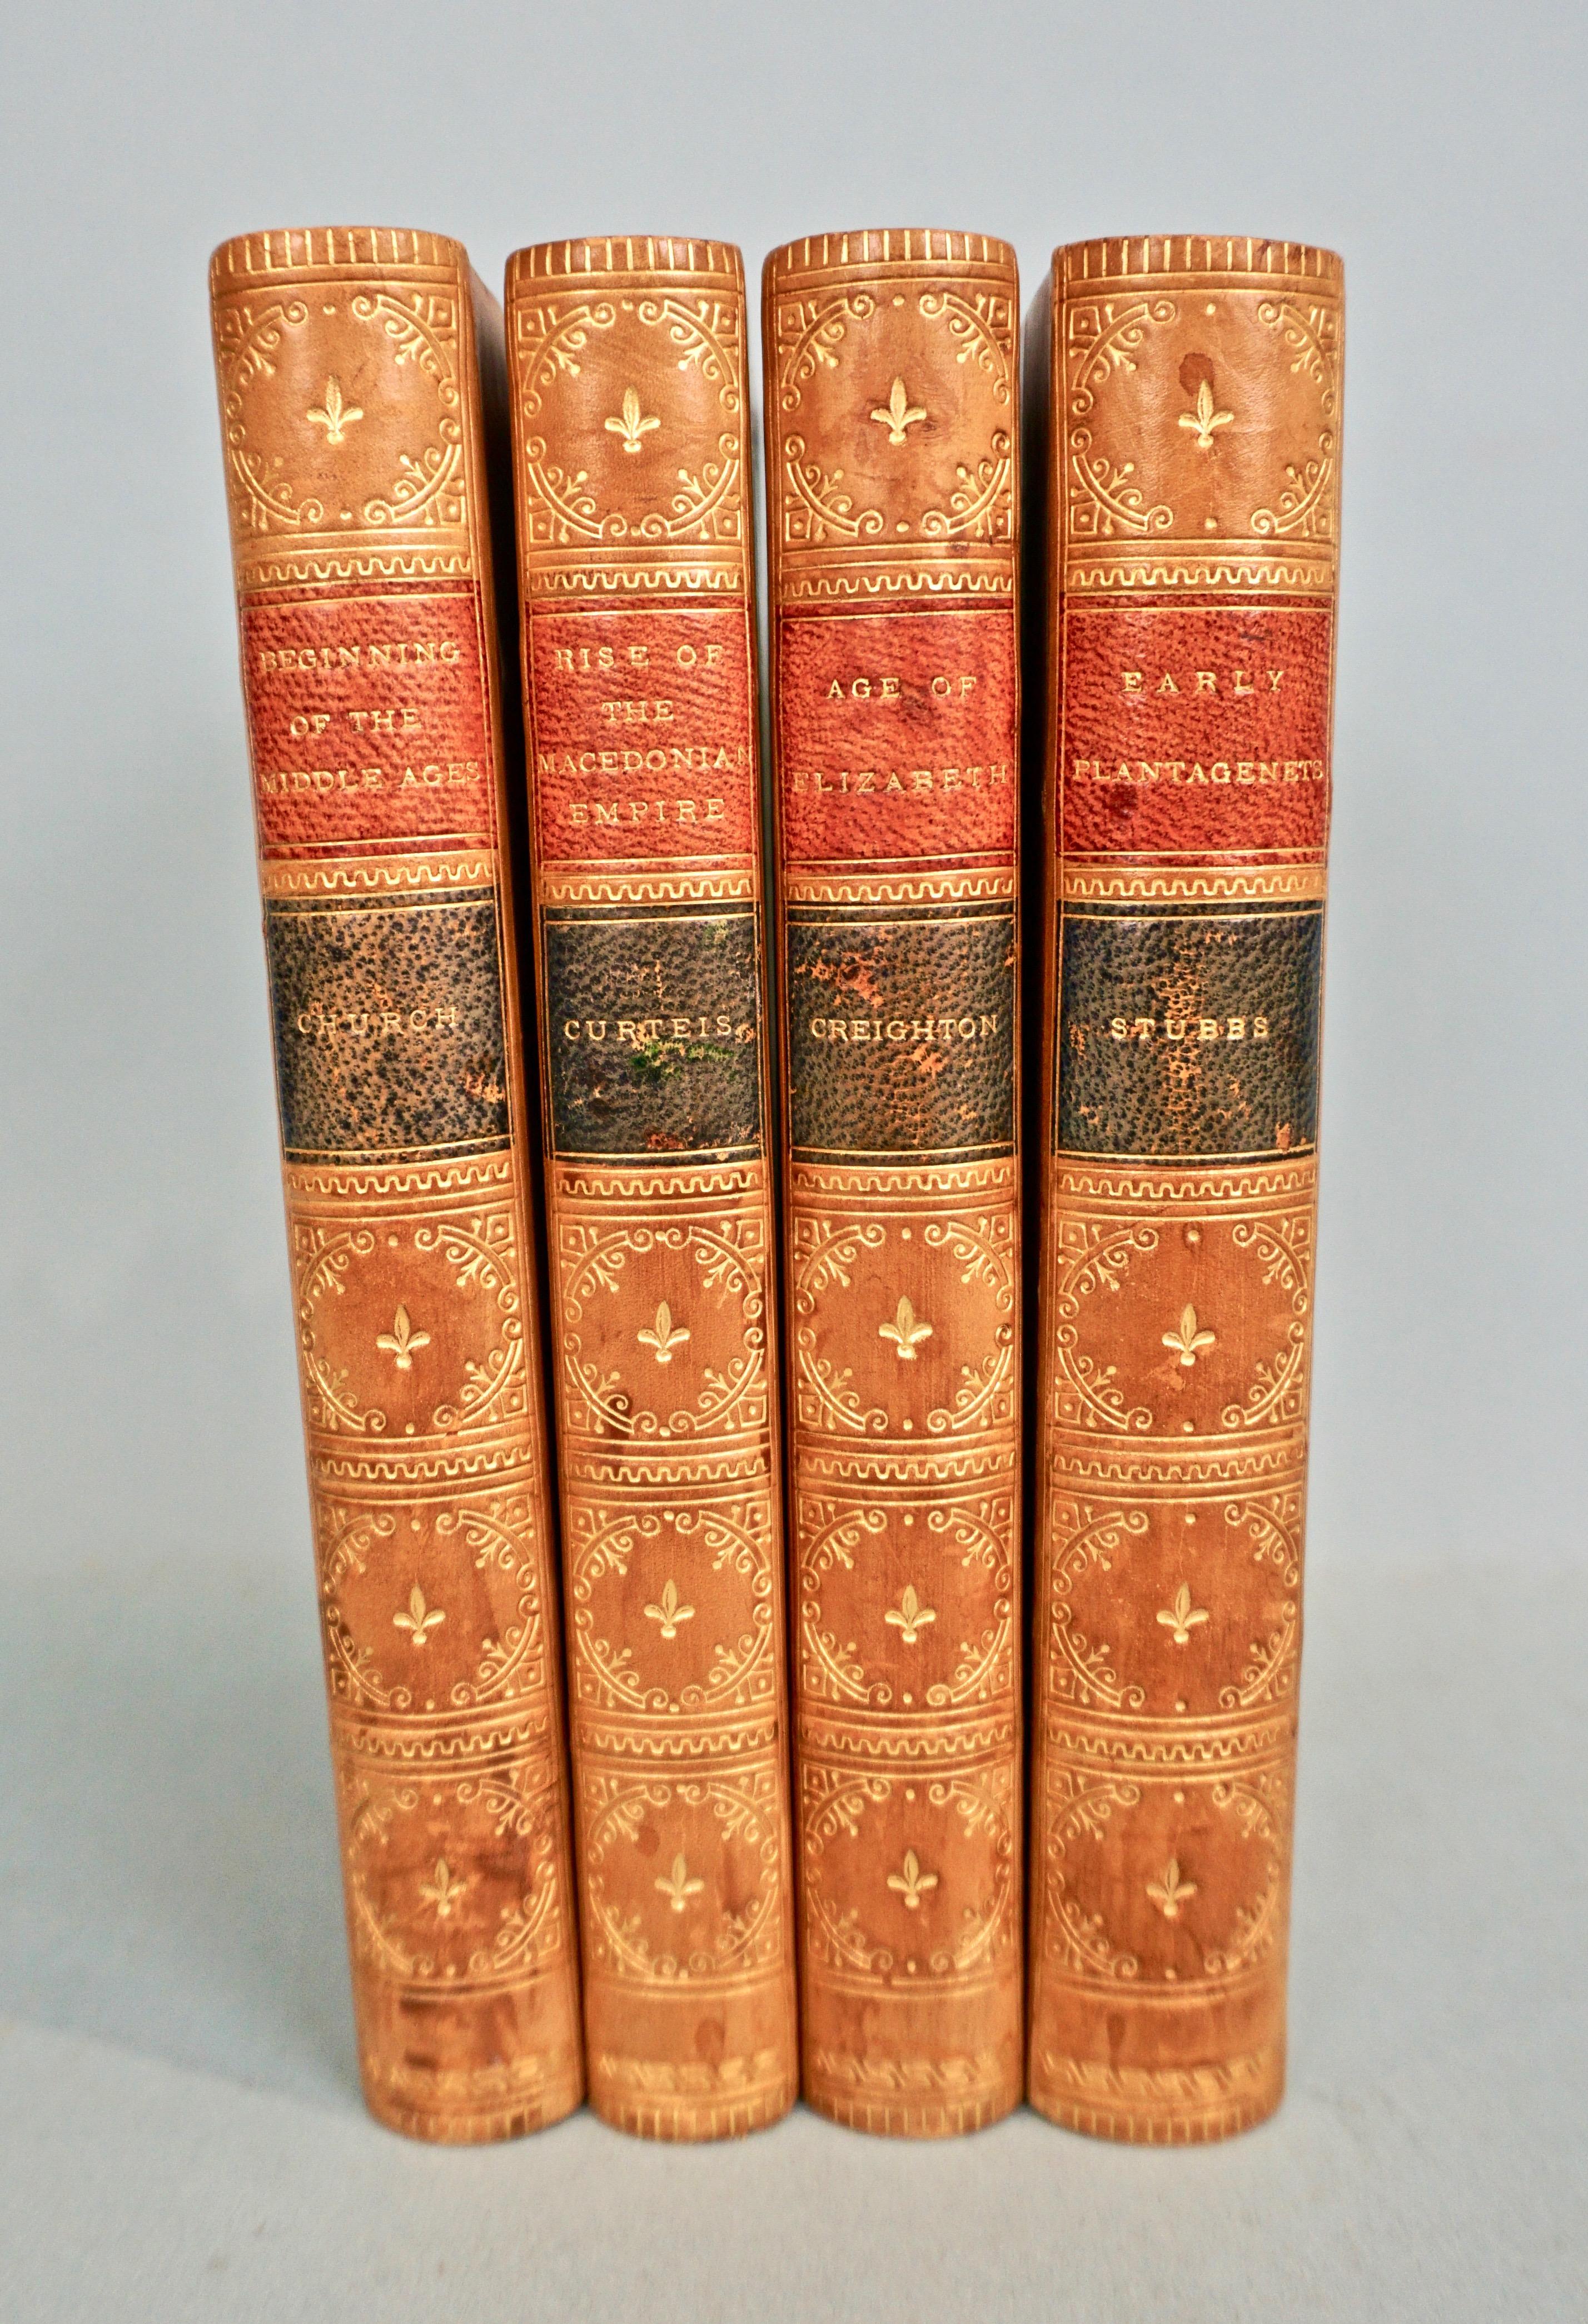 North American Epochs of Ancient History in 20 Volumes Bound in Tan Leather